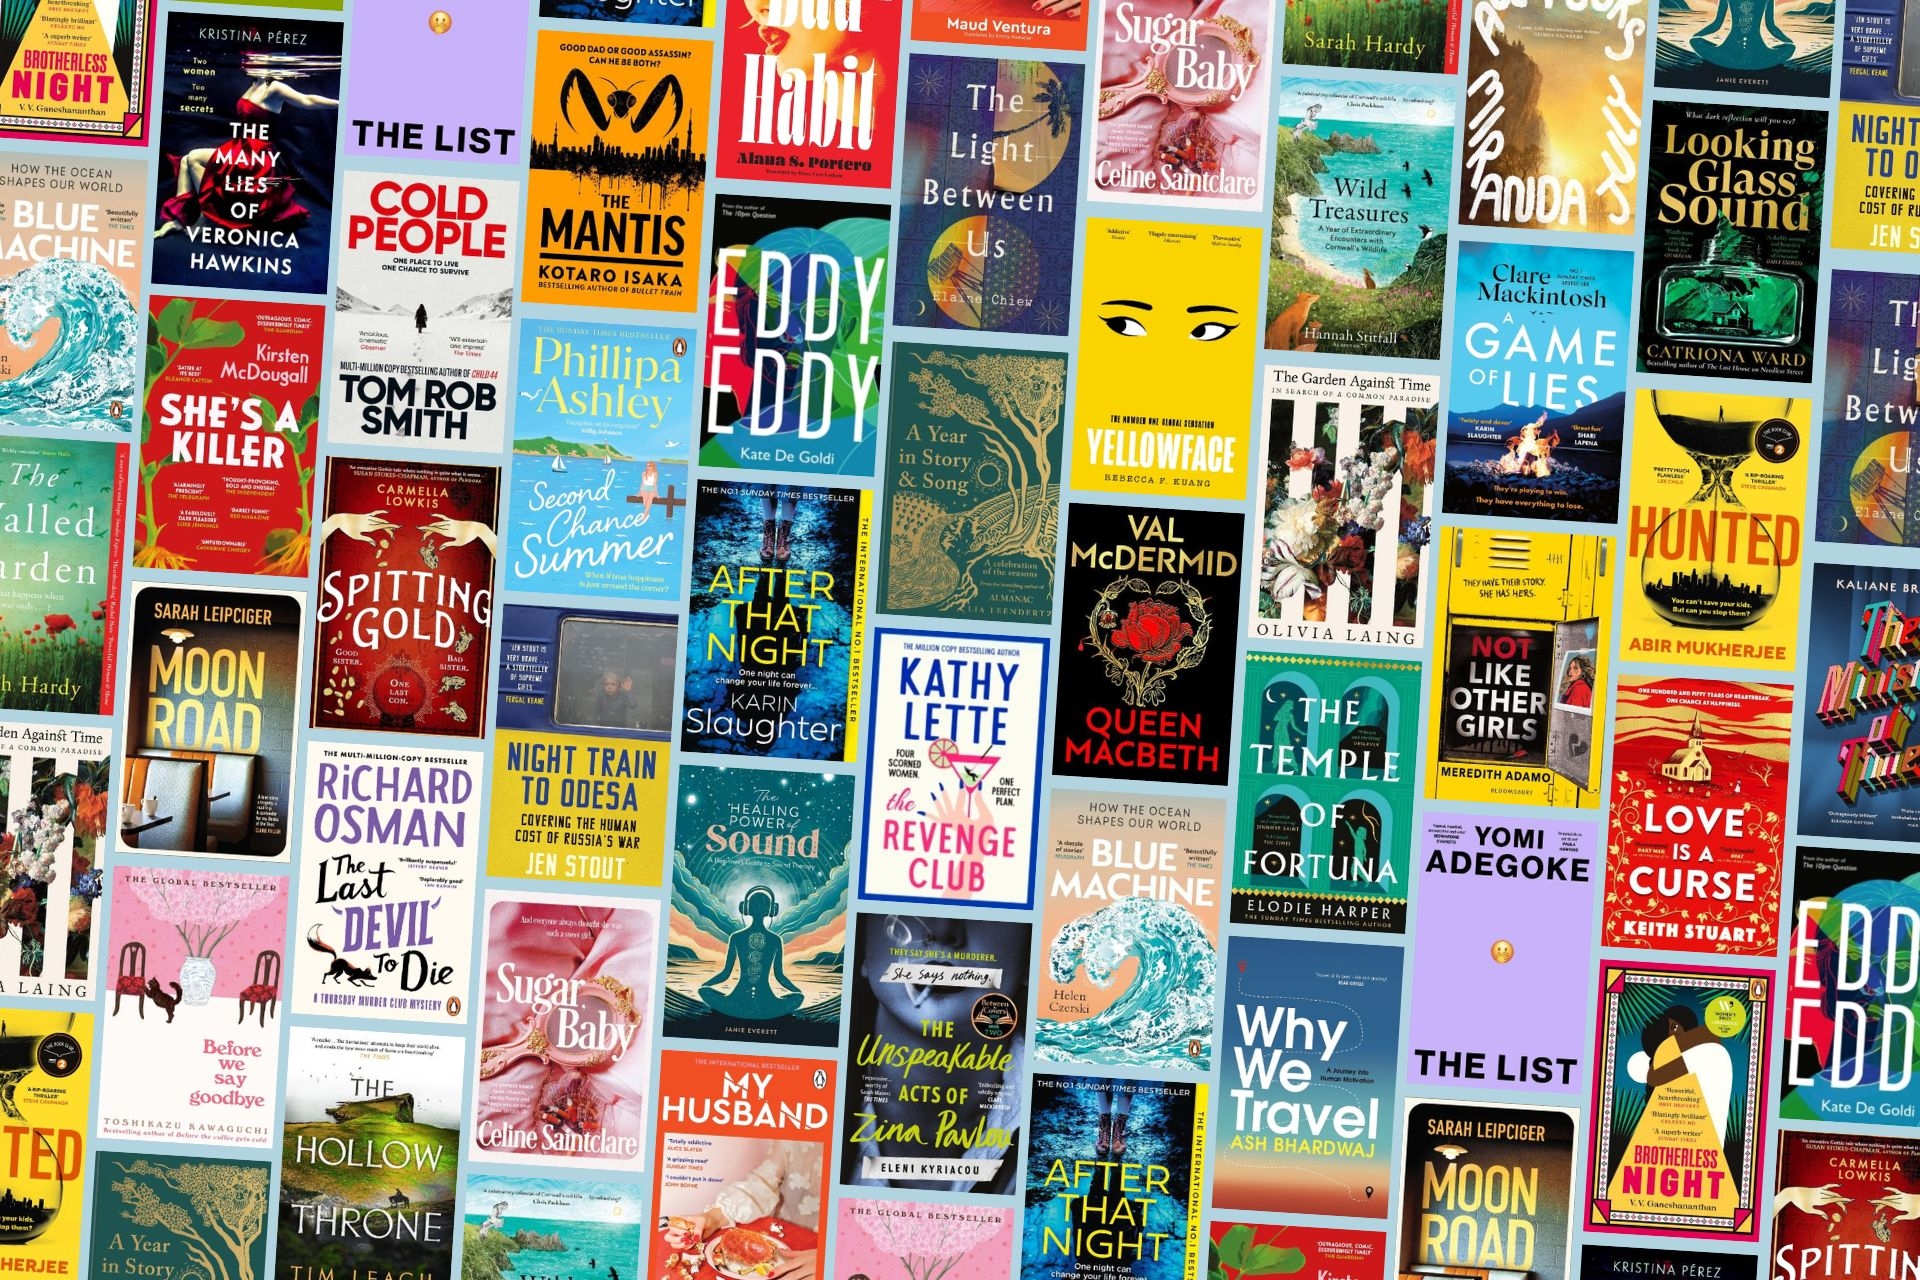 Start Planning Your Summer Reading or Get Your Hands on Some New Releases with Our May Summary